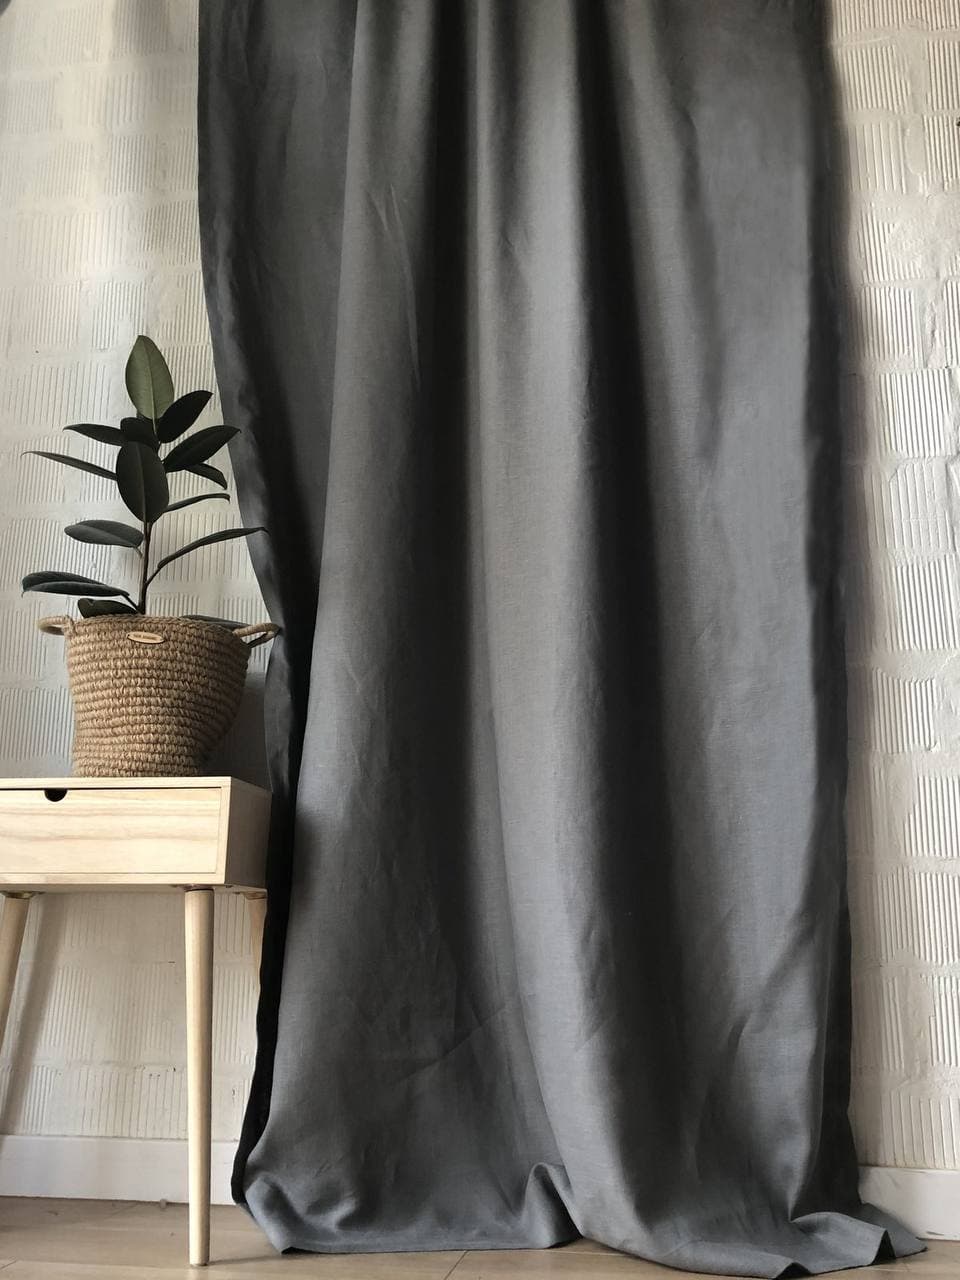 Solid Rod Pocket Single Flax Linen Curtain Panel with Blackout Lining - Room Darkening Lined Panels - Ruffled Header and Easy Installation